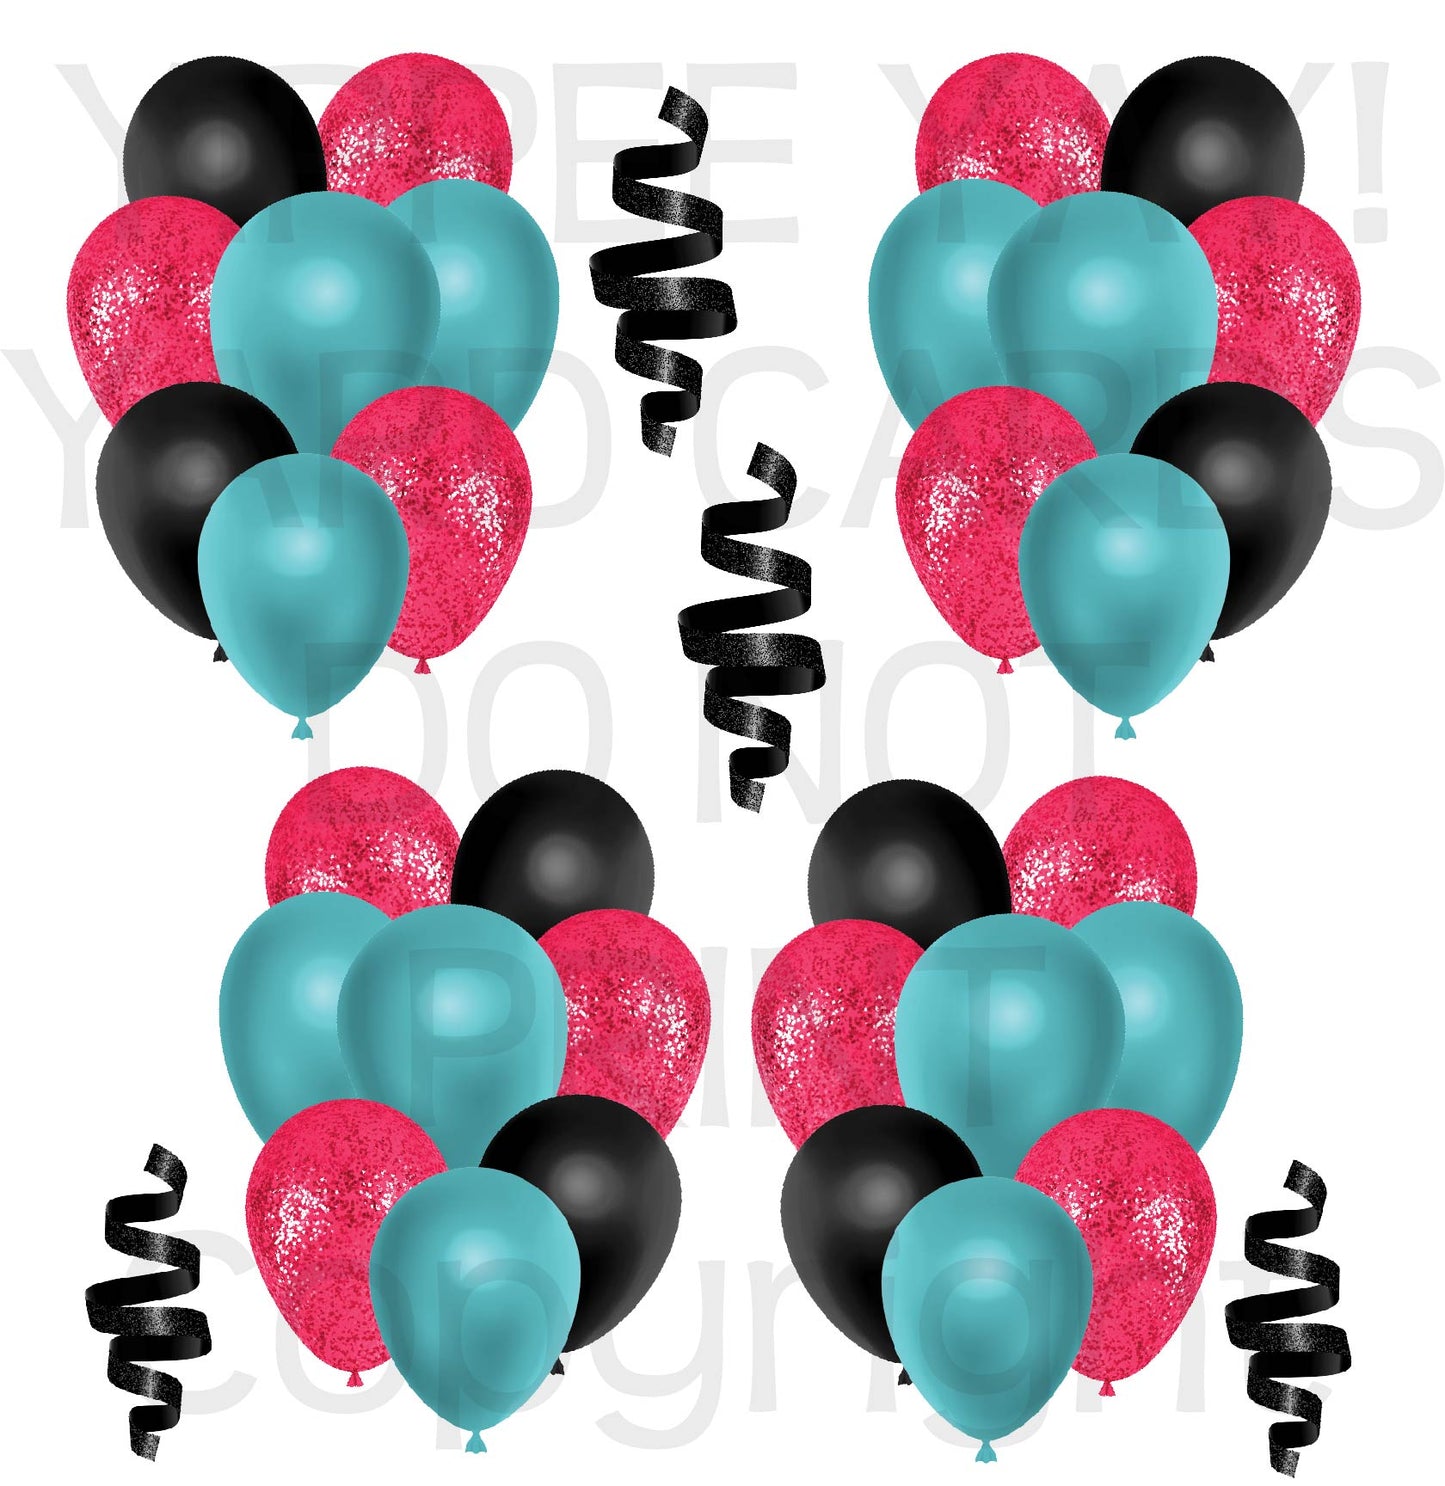 Tik Tok Inspired Balloons 1 Half Sheet  (Must Purchase 2 Half sheets - You Can Mix & Match)